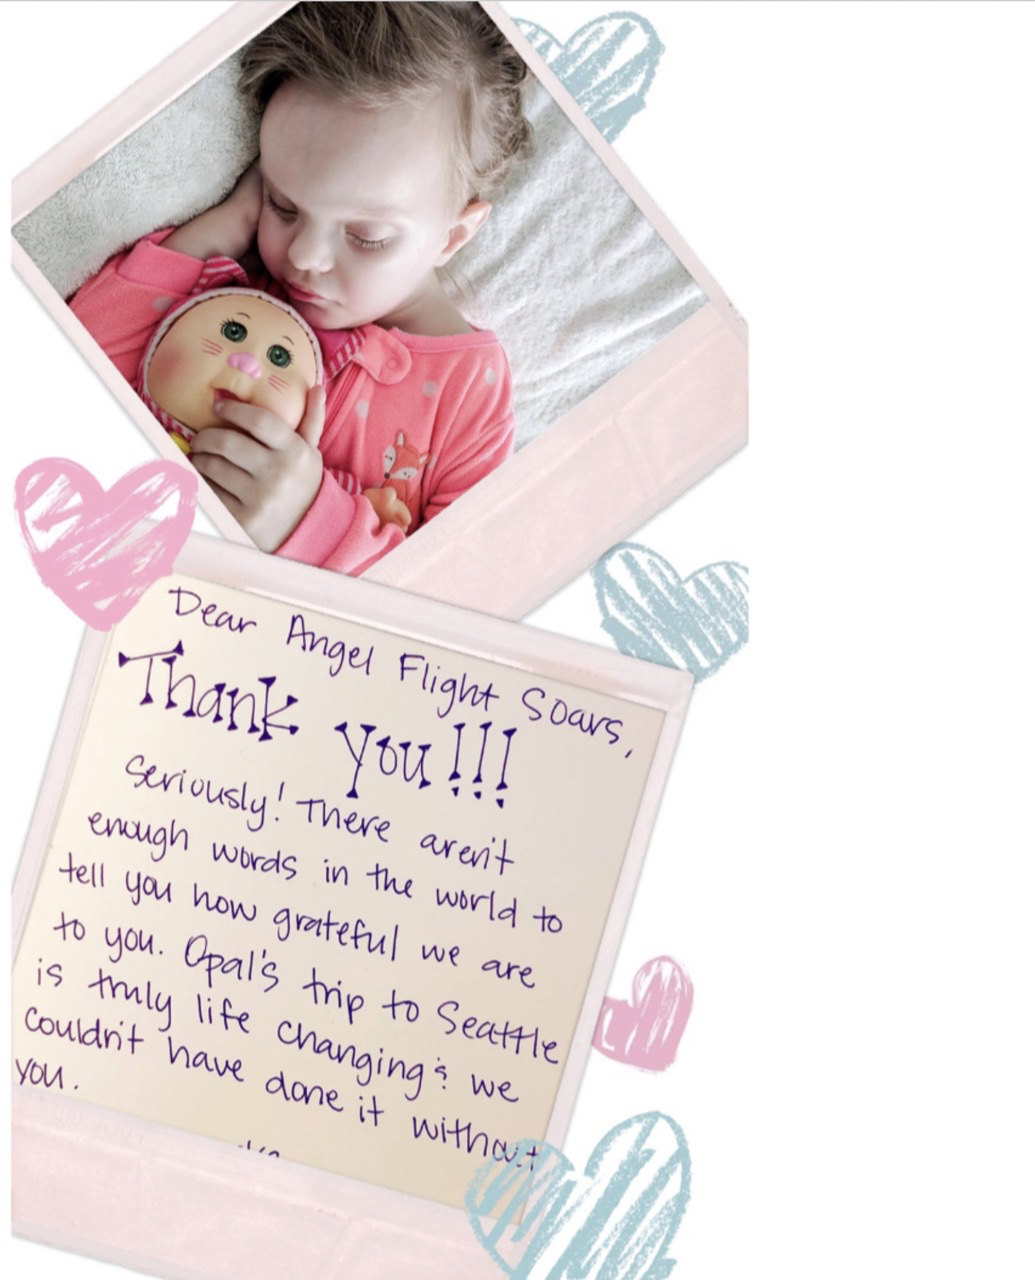 Opal Padgett, an Angel Flight Soar's patients, sleeping in a photo with a thank you note that was sent to Angel Flight Soars and Ben Cason.